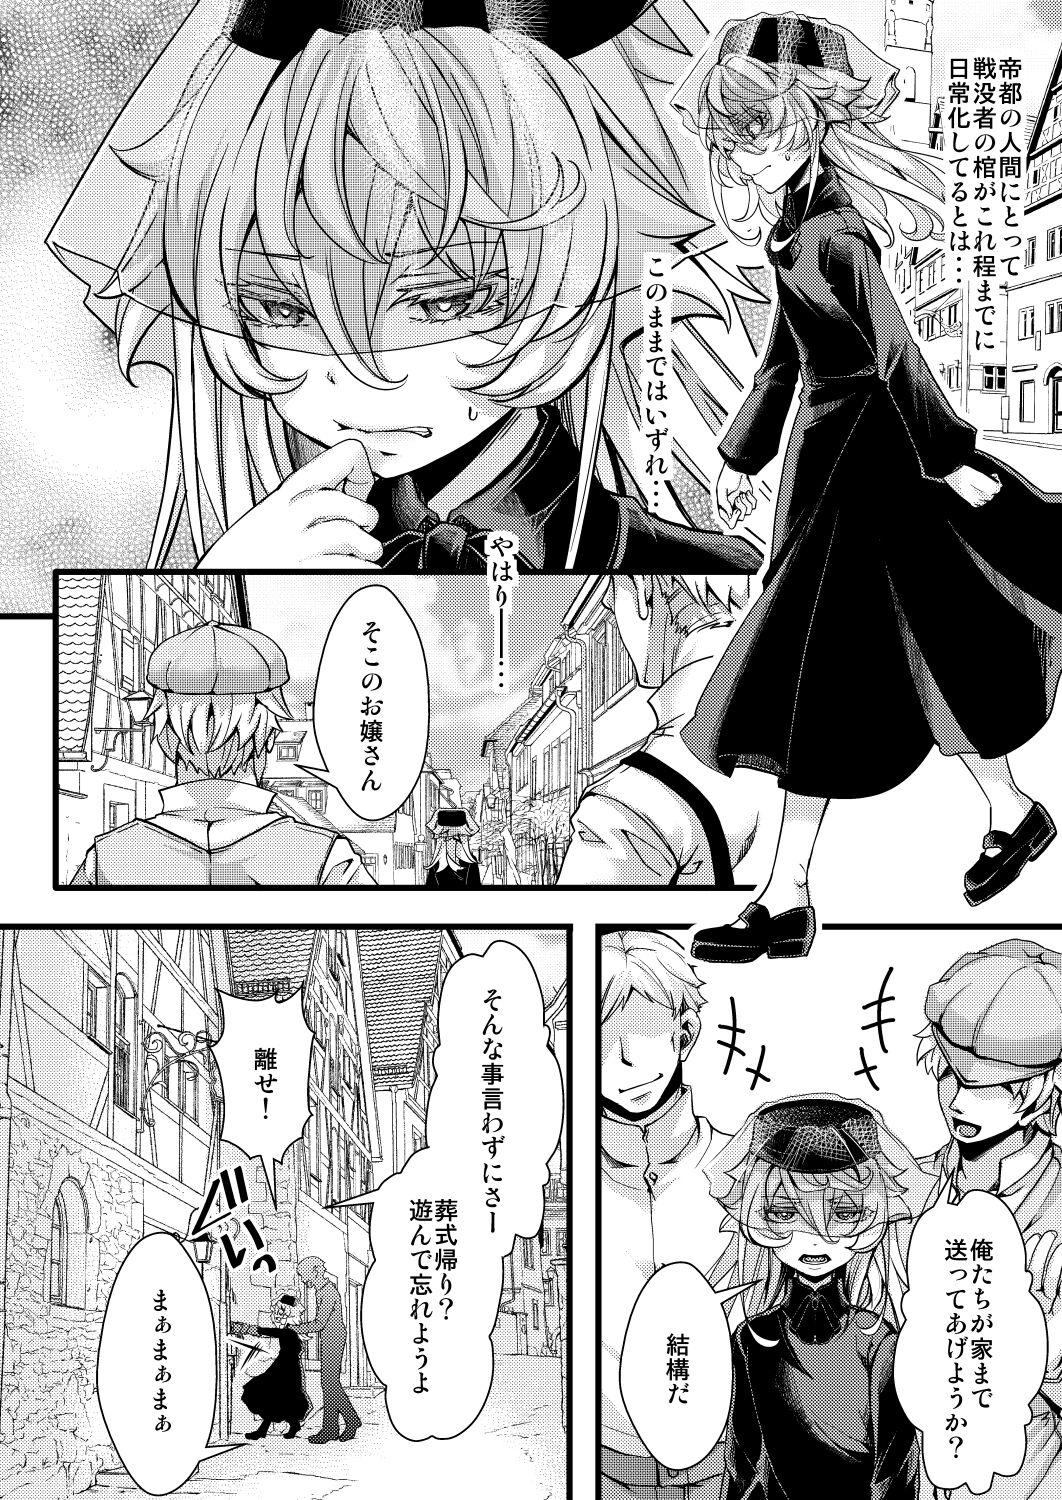 Wet Cunt Rugs - Youjo senki | saga of tanya the evil Gay Party - Page 4